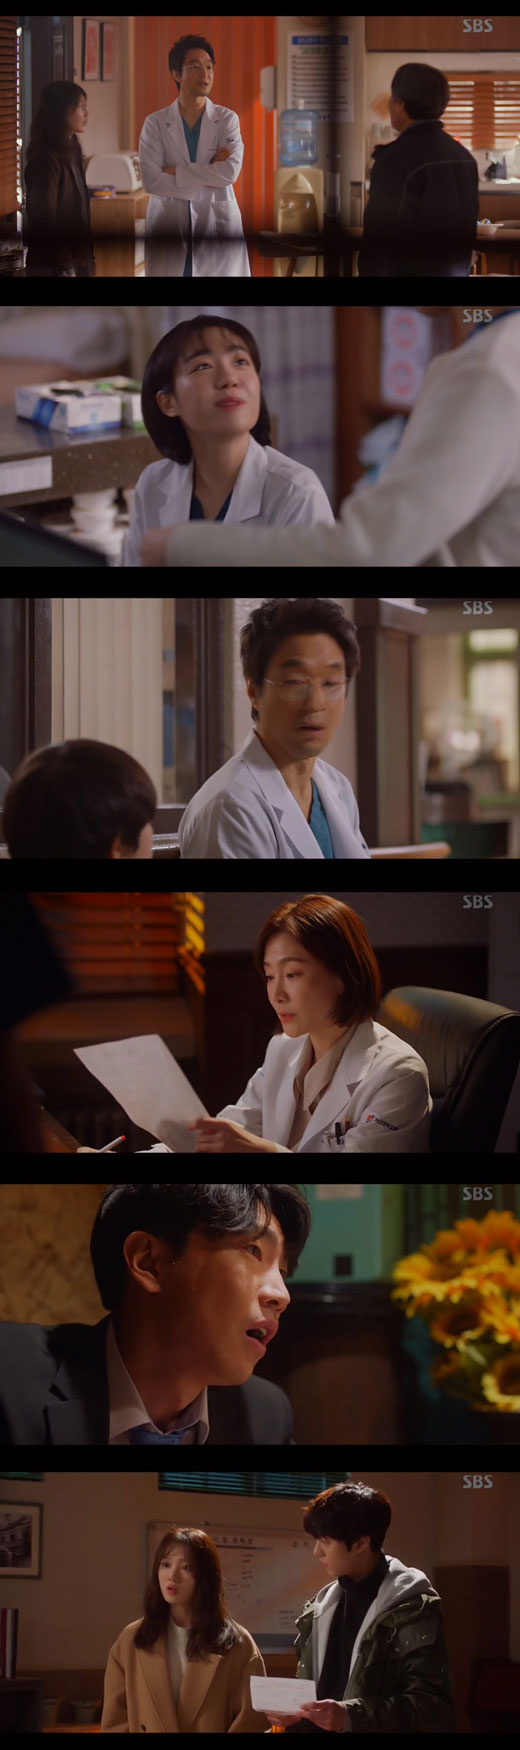 Will Romantic Doctor Kim Sabu 2 Ahn Hyo-seop leave Doldam Hospital?Lee Sung-kyung (Cha Eun-jae) overcame the surgery Nausea in SBS Wolhwa Drama Romantic Doctor Kim Sabu 2 (playplayed by Kang Eun-kyung, directed by Yoo In-sik Lee Gil-bok) broadcast on the 17th.On the show, Seo Woo Jin (Ahn Hyo-seop) looked at Kim Sabus wound and worried, When will you get the date of surgery, please let me know because Im your doctor?Kim said, How long will the operating room not go in? Seo Woo Jin replied, It is a problem with Professor Park Min-guk.Kim said, Do one more case on time.Doldam Hospital was accompanied by an emergency patient with a severed leg in a factory cutter.Cha Eun-jae, who ran to the medical room after receiving a call, performed first aid with Park Eun-tak (Kim Min-jae) at Bae Mun-jungs instructions, and Kim Sa-bu performed the surgery straight away.Then, Seo Woo Jin visited Park Min-guk (Kim Joo-heon) and demanded permission to operate, saying that there are emergency patients.Park Min-guk ordered Yang Ho-joon (Ko Sang-ho) to perform surgery instead, and did not give up surgery room 1 because he saw VVIP patients. Nam Do-il (Kyun Woo-min) was angry.Bae Moon-jung told Kim Sabu, The patient with the amputated leg does not want surgery. It seems to be due to the operation cost. Kim said, Did not you contact the factory?When Kim Sabus words were over, the patients wife and child came to the hospital, and his wife saw the severed legs and said, What do you do?Kim approached the two people and said, Get surgery soon. The degree of recovery depends on your will. The patient said, I can not do such surgery.I can not spend money because I do not know what will happen. What do my seller do? I just think I was a bad luck. Kim said, I am a father and now I do not remember anyone who gives up on it.I am a father who is desperated because of his luck. After the emergency patient continued to come in without any time to cope with Yang Ho-joon, Park Min-guk told Seo Woo Jin, Emergency trauma should be taken by Seo Woo Jin until the VIP patients surgery is over.Do not bother my team anymore, and Seo Woo Jin showed a joy and started preparing for surgery.On the other hand, Cha Eun-jae came to Kim Sabu, and Cha Eun-jae said to Kim Sabu, I have not finished the Nausea medicine you gave me. I would like you to tell me what medicine is.Kim said, I do not need a prescription. It was a digestive agent. I explained your case to a doctor I know well.I think the pressure to do well is maximized in a narrow operating room. You dont have to feel pressure anymore. Youve done well.Then, Seo Woo Jin, who was in surgery, called Cha Eun-jae and asked him to solve the patients chest symptoms.Seo Woo Jin said to Cha Eun-jae, who is worried that Nausea will be back, Why are you so confident? How much surgery you have done in the meantime.I will run and run if I fall again. Cha Eun-jae entered the operating room and finished the patients surgery perfectly.Then, Cha moved straight to the first operating room to assist Kim Sabu, who was leading a patient with a severed leg, and finished the operation safely.Yang Jun-ho, who failed to schedule the VIPs surgery, asked Shim Hye-jin (Park Hyo-joo) to confirm the operating room, saying, I am sensitive to Professor Park Min-guk these days.Shim Hye-jin refused, saying, I am against this surgery. I have a bad feeling.Yang Jun-ho told Park Min-guk, and he said, Let me have surgery tomorrow.Finally, Seo Woo Jin was found and dragged by Ushijima the Loan Shark vendors while he was with Cha Eun-jae.Ushijima the Loan Shark vendors offered a contract to another hospital, threatening Seo Woo Jin that he had a person named Kim Sabu at the hospital.After that, Seo Woo Jin returned to Doldam Hospital, and he told Kim Sabu, I think I should go to another hospital.I wanted to quit several times, but I praised me for saying, I did not give up. I did not give up and I met Kim Sabu. It was not a long time, but I thanked him.